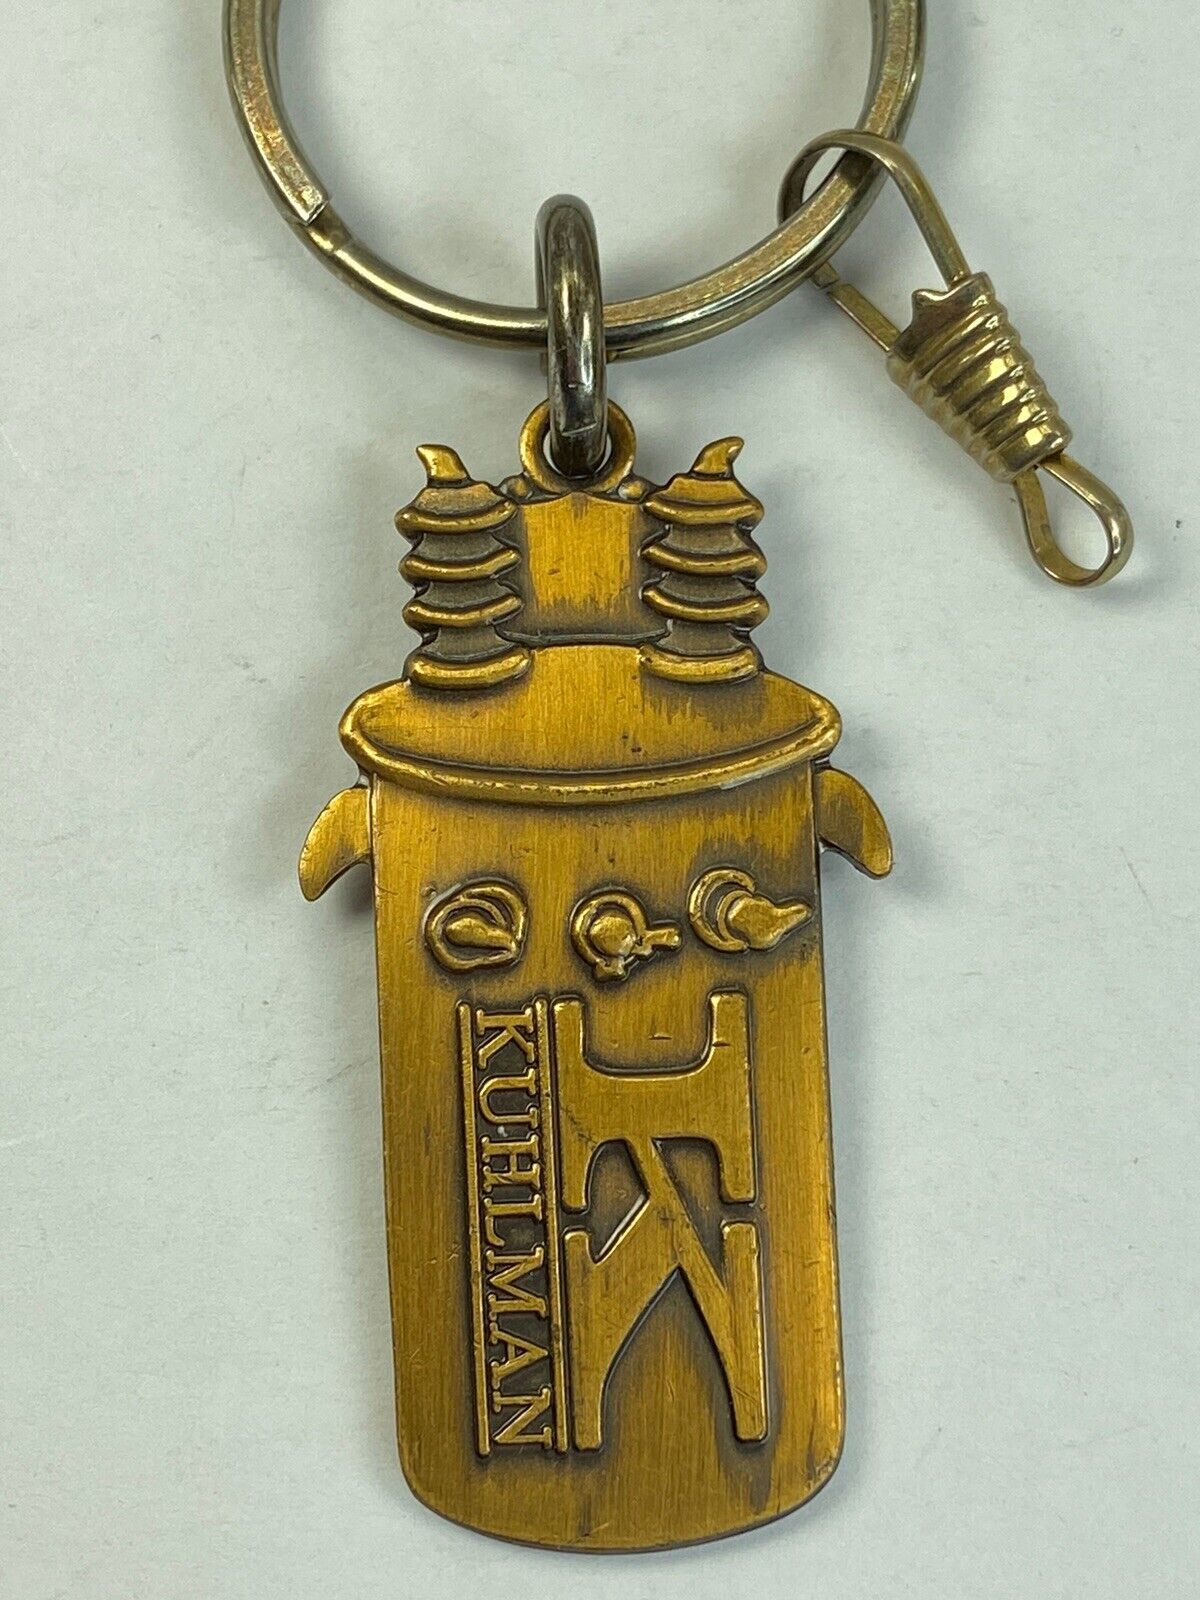 Kuhlman Electric Corporation Electric Transformers Versailles, Kentucky Keychain